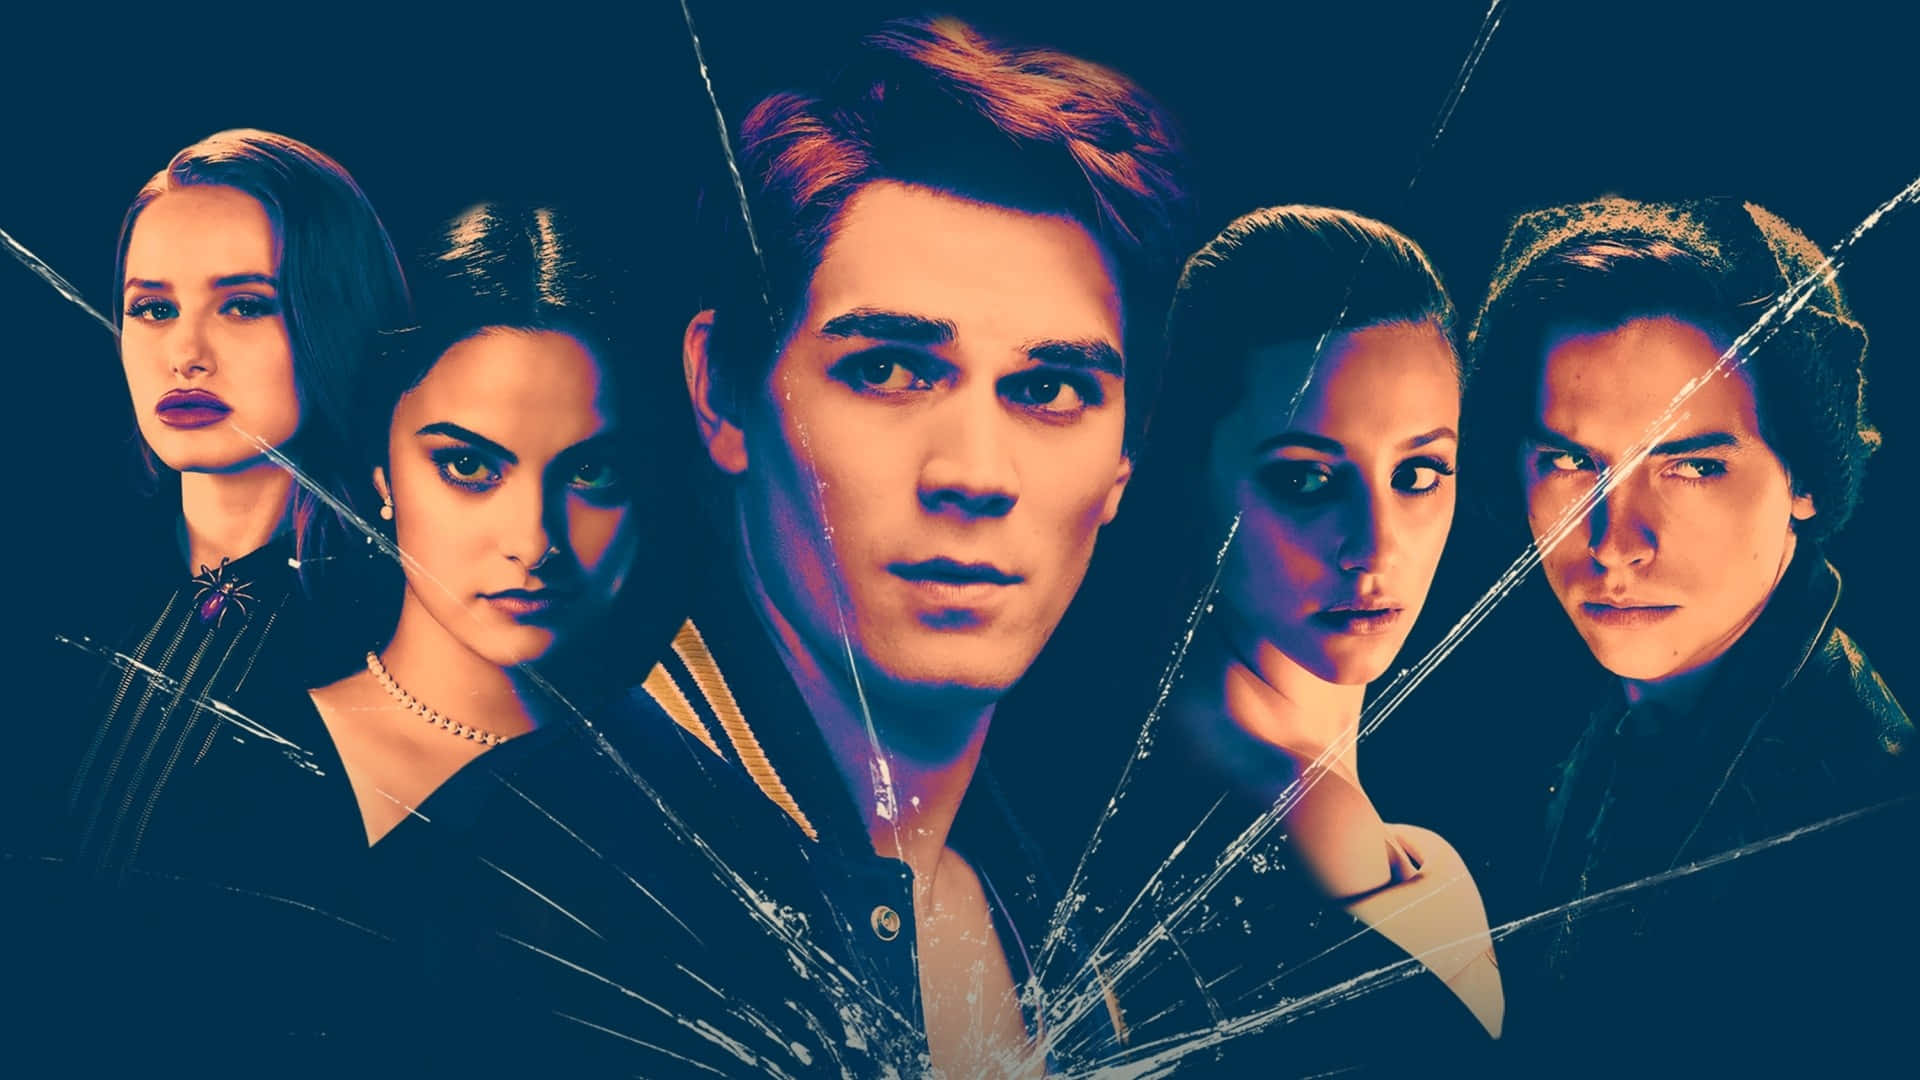 Welcome to the mysterious world of Riverdale. Be prepared to immerse yourself in thrilling secrets and teenage friendships!